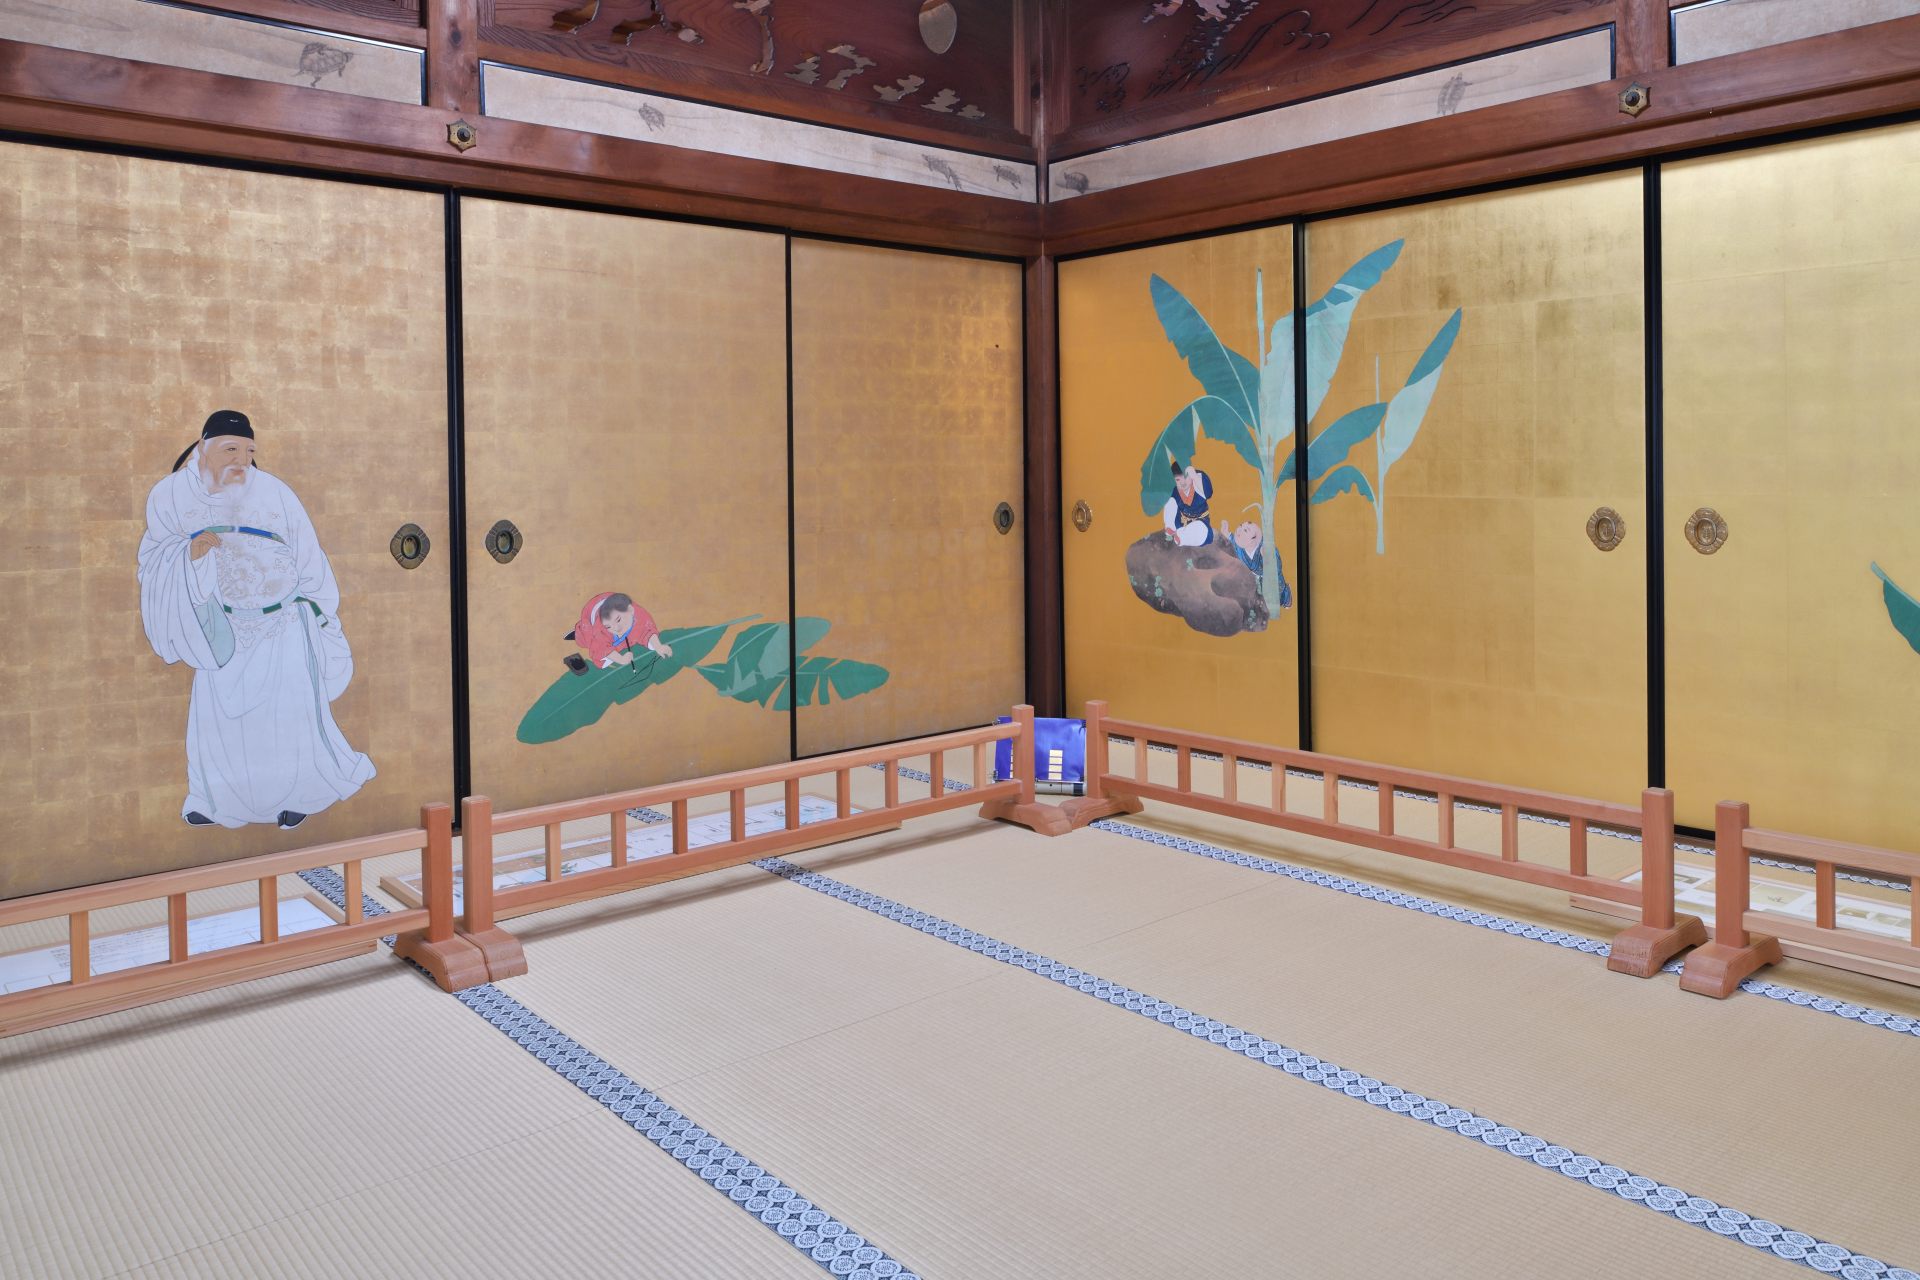 Daijo-ji Temple, with its sliding panel paintings by Maruyama Okyo is also known as “Okyo-dera Temple.”

